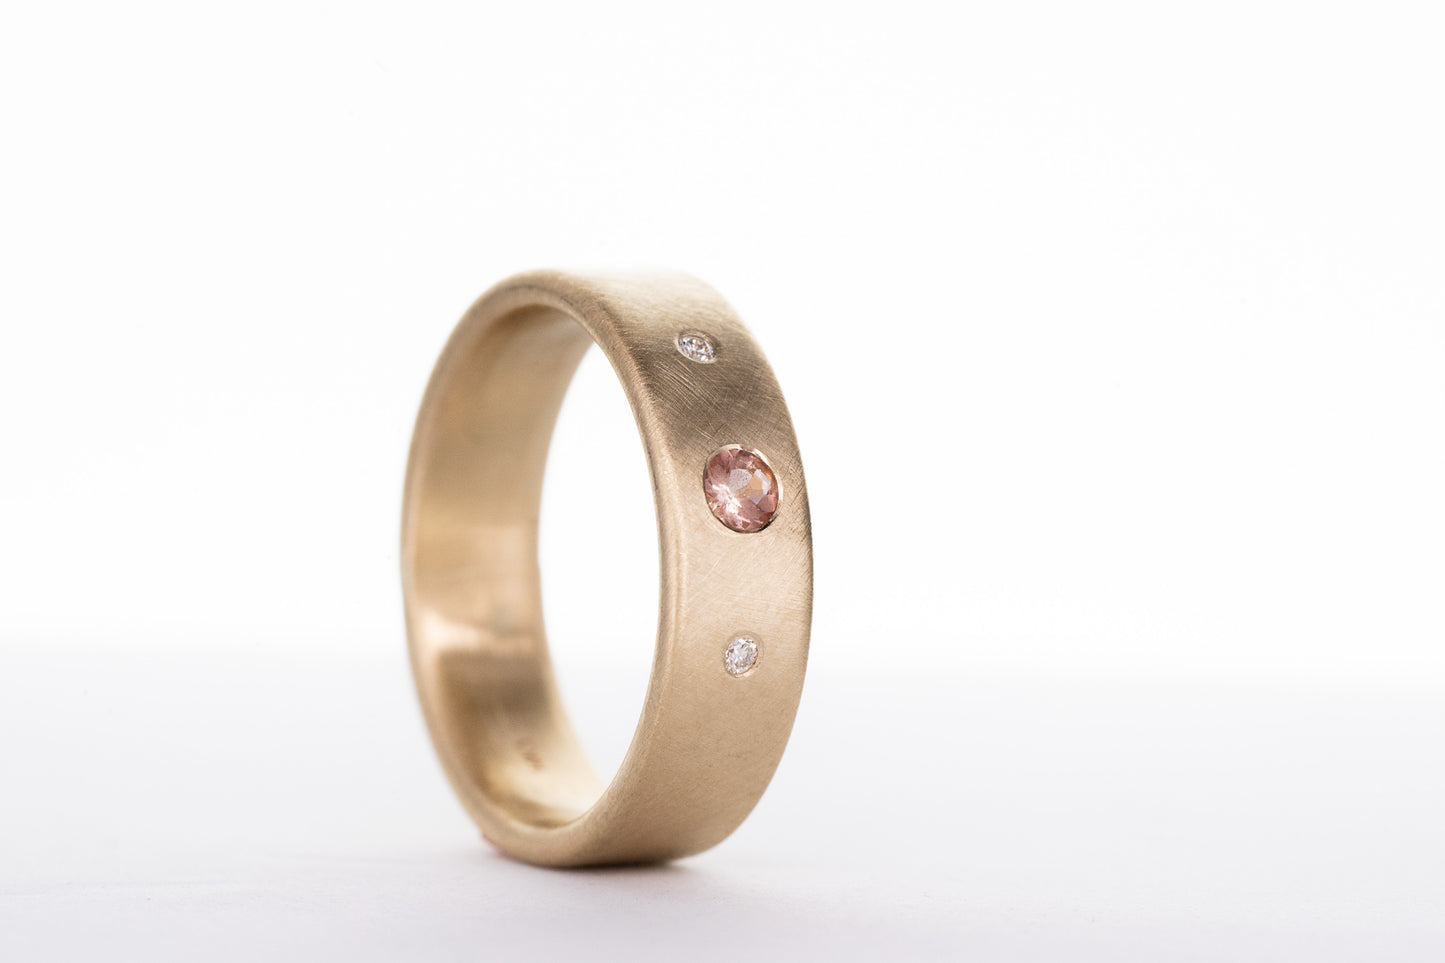 A handmade Oregon Sunstone and Diamond wedding ring with pink diamonds, crafted by Cassin Jewelry.